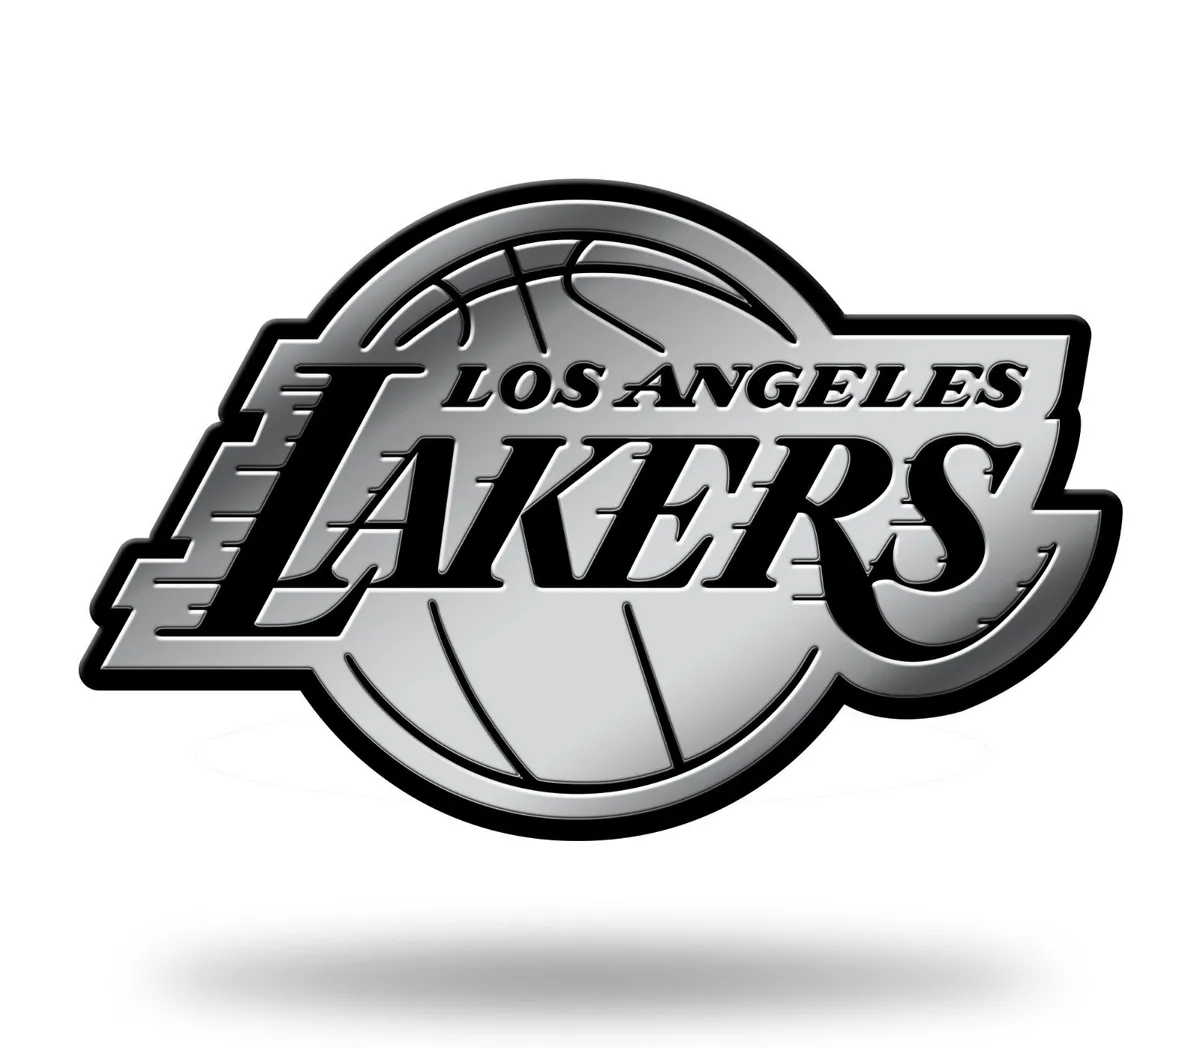 Los angeles lakers logo d chrome to decal sticker new truck car rico